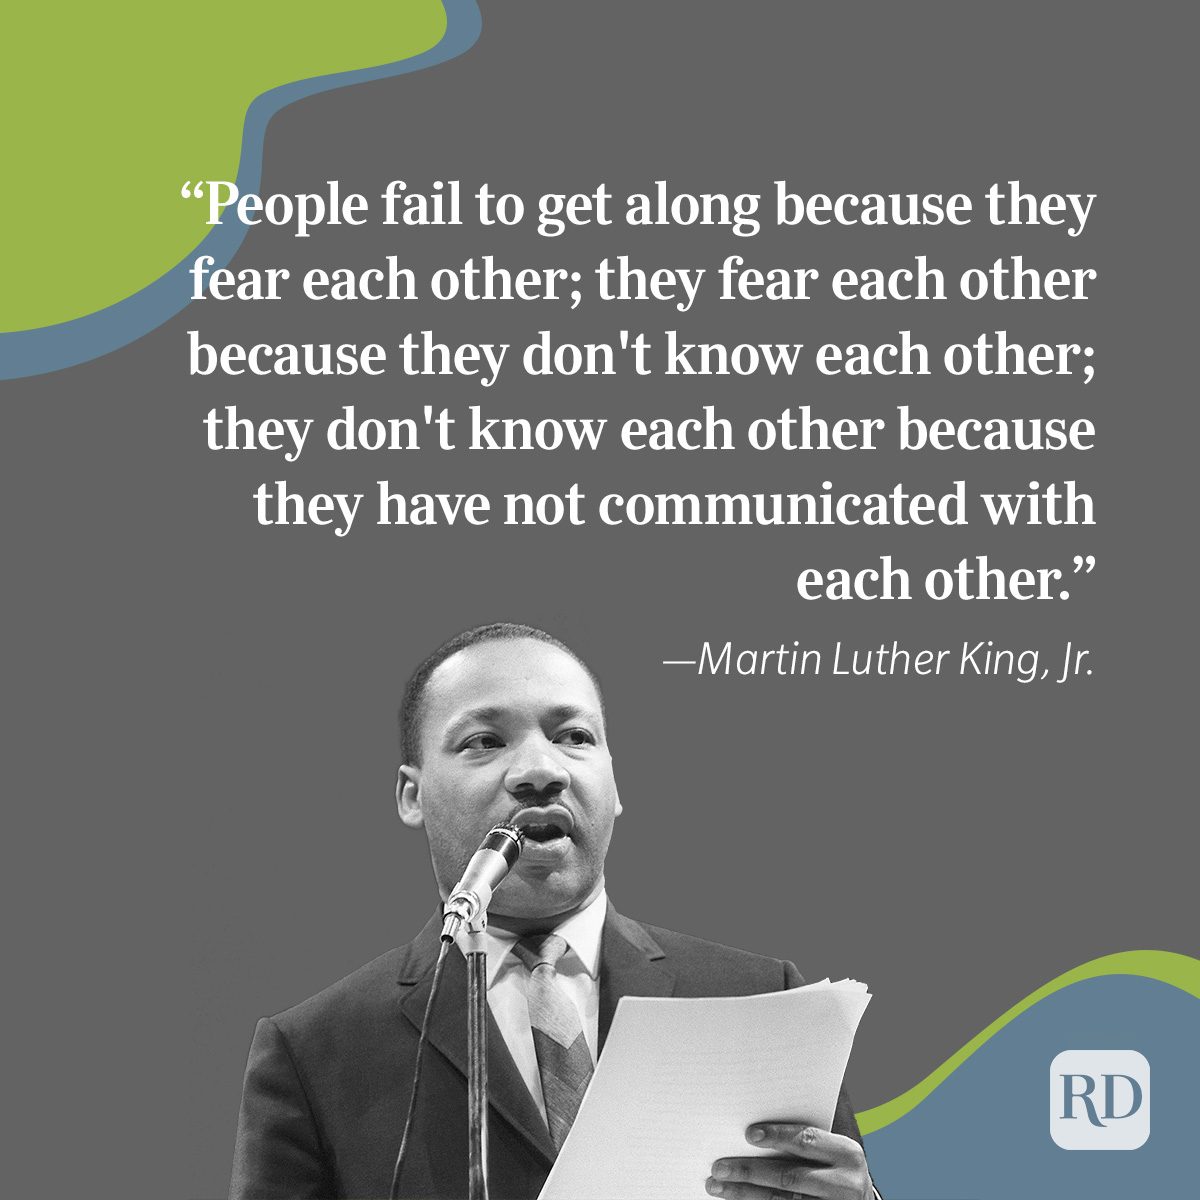 20 Powerful MLK Quotes - Inspirational Martin Luther King Jr. Quotes